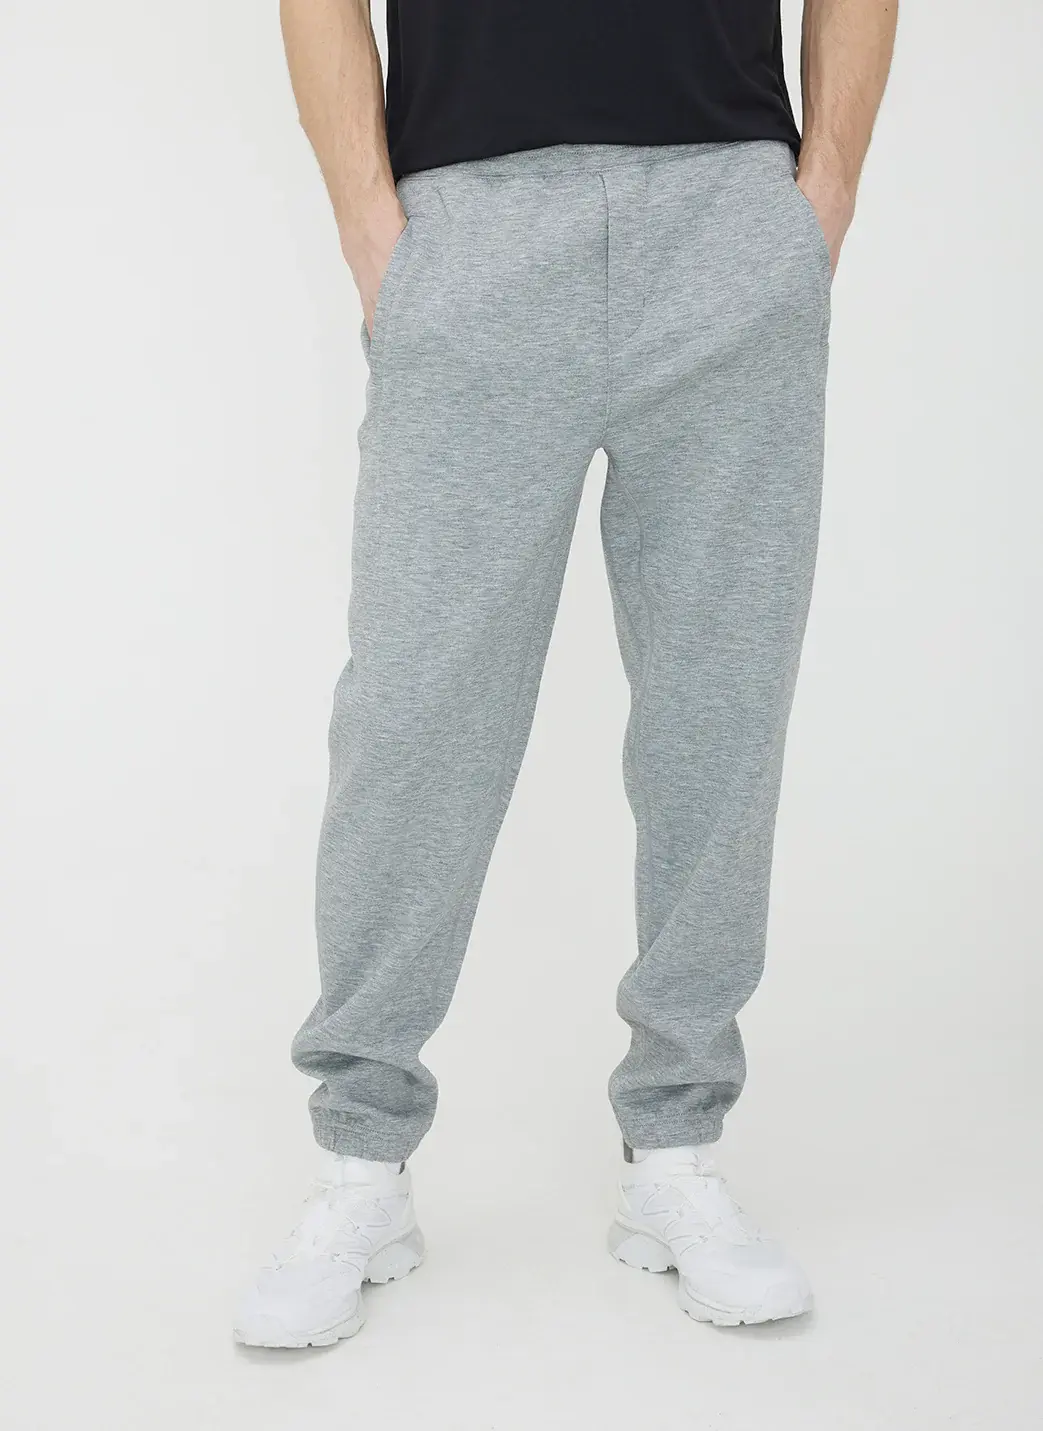 Kit And Ace Relay Track Pants. 1